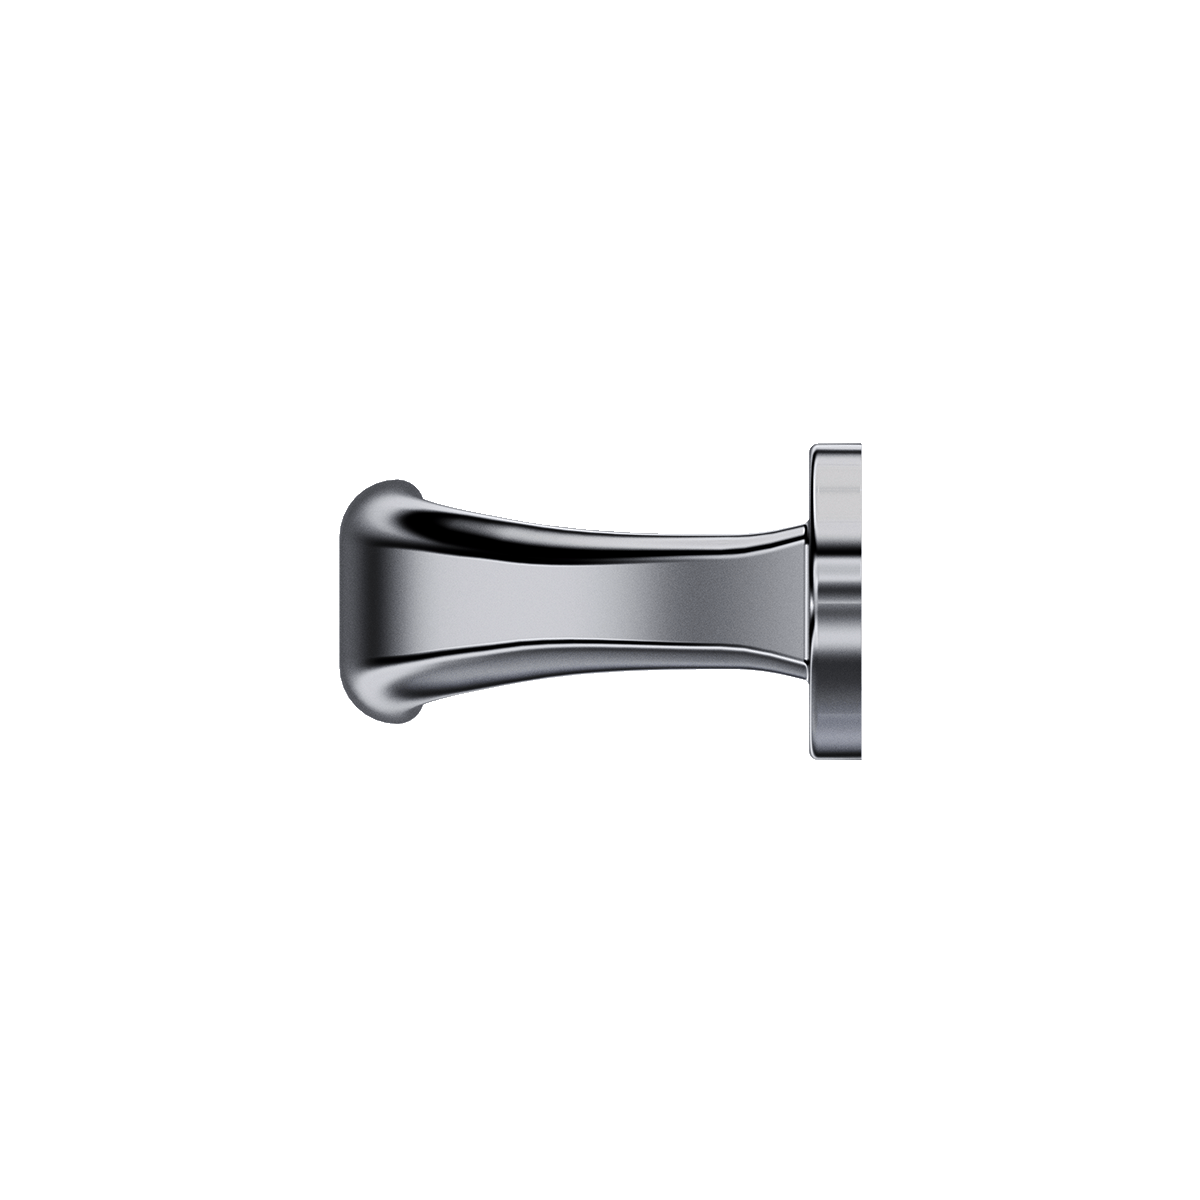 Utility Pull Handle, 3/4 view